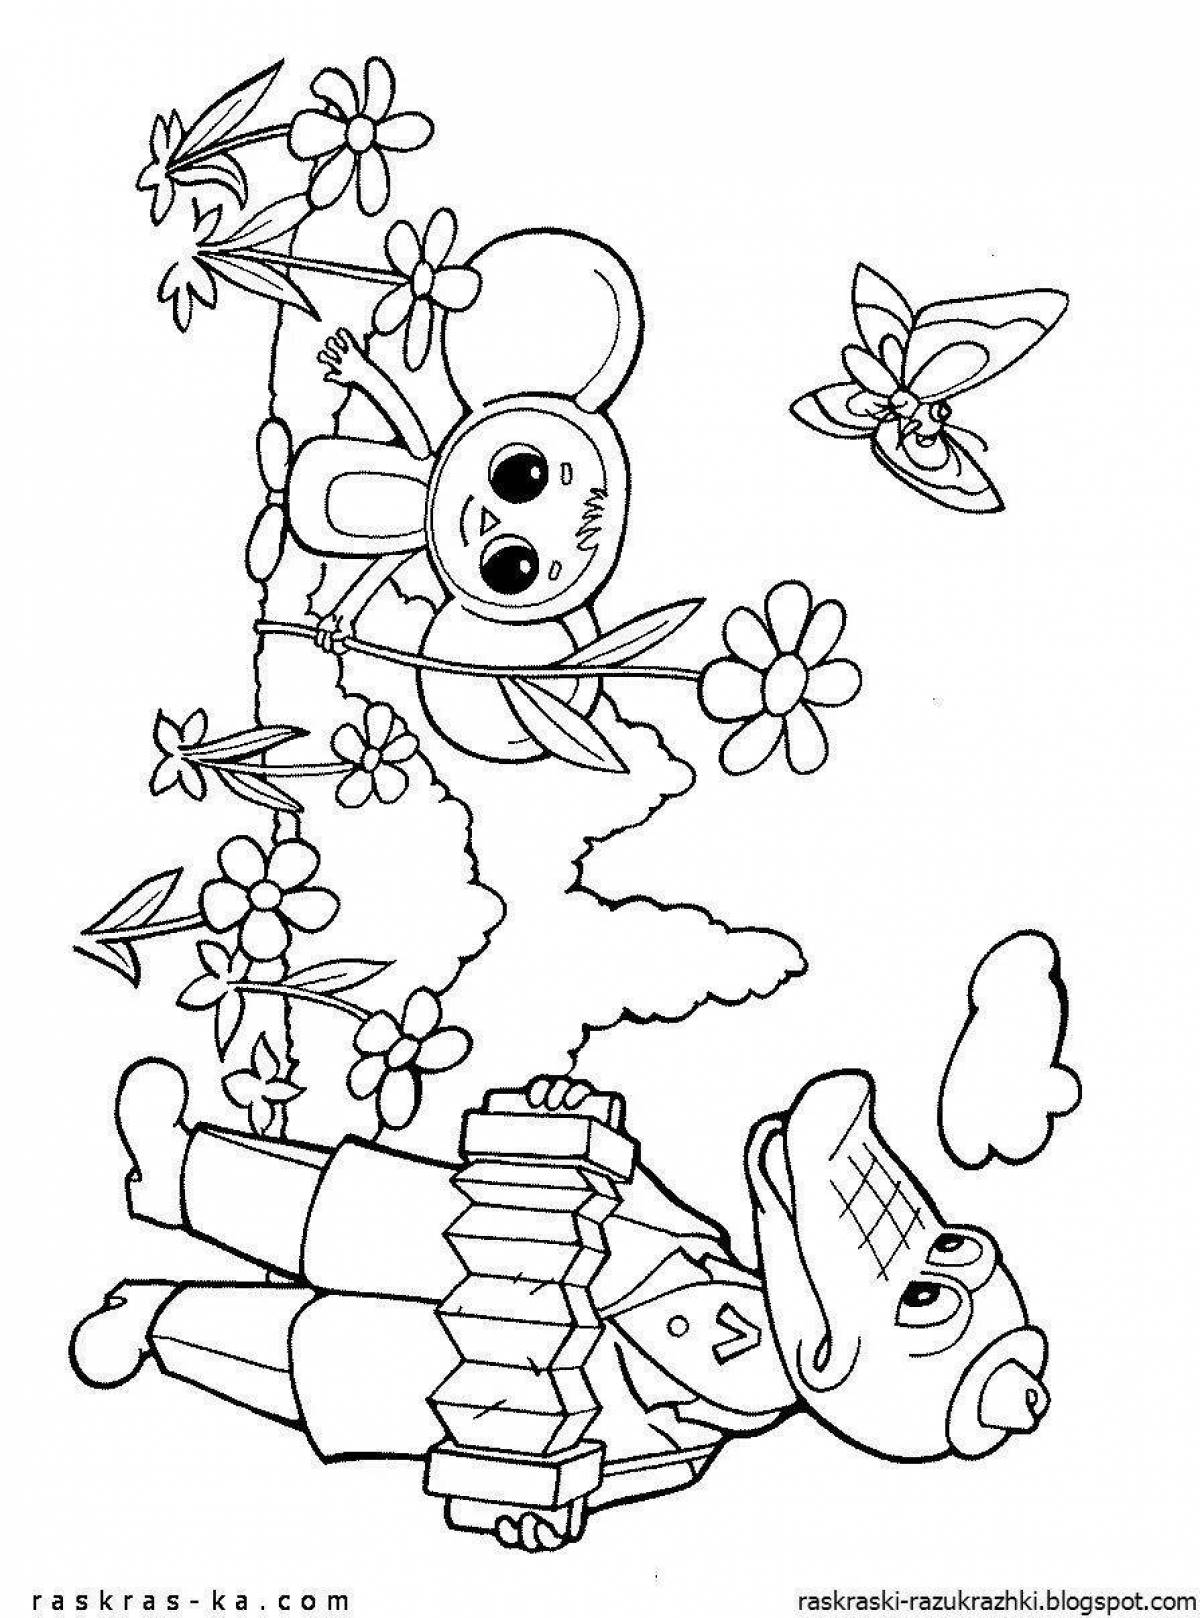 Inspirational Soviet coloring book for kids from the 70s and 80s